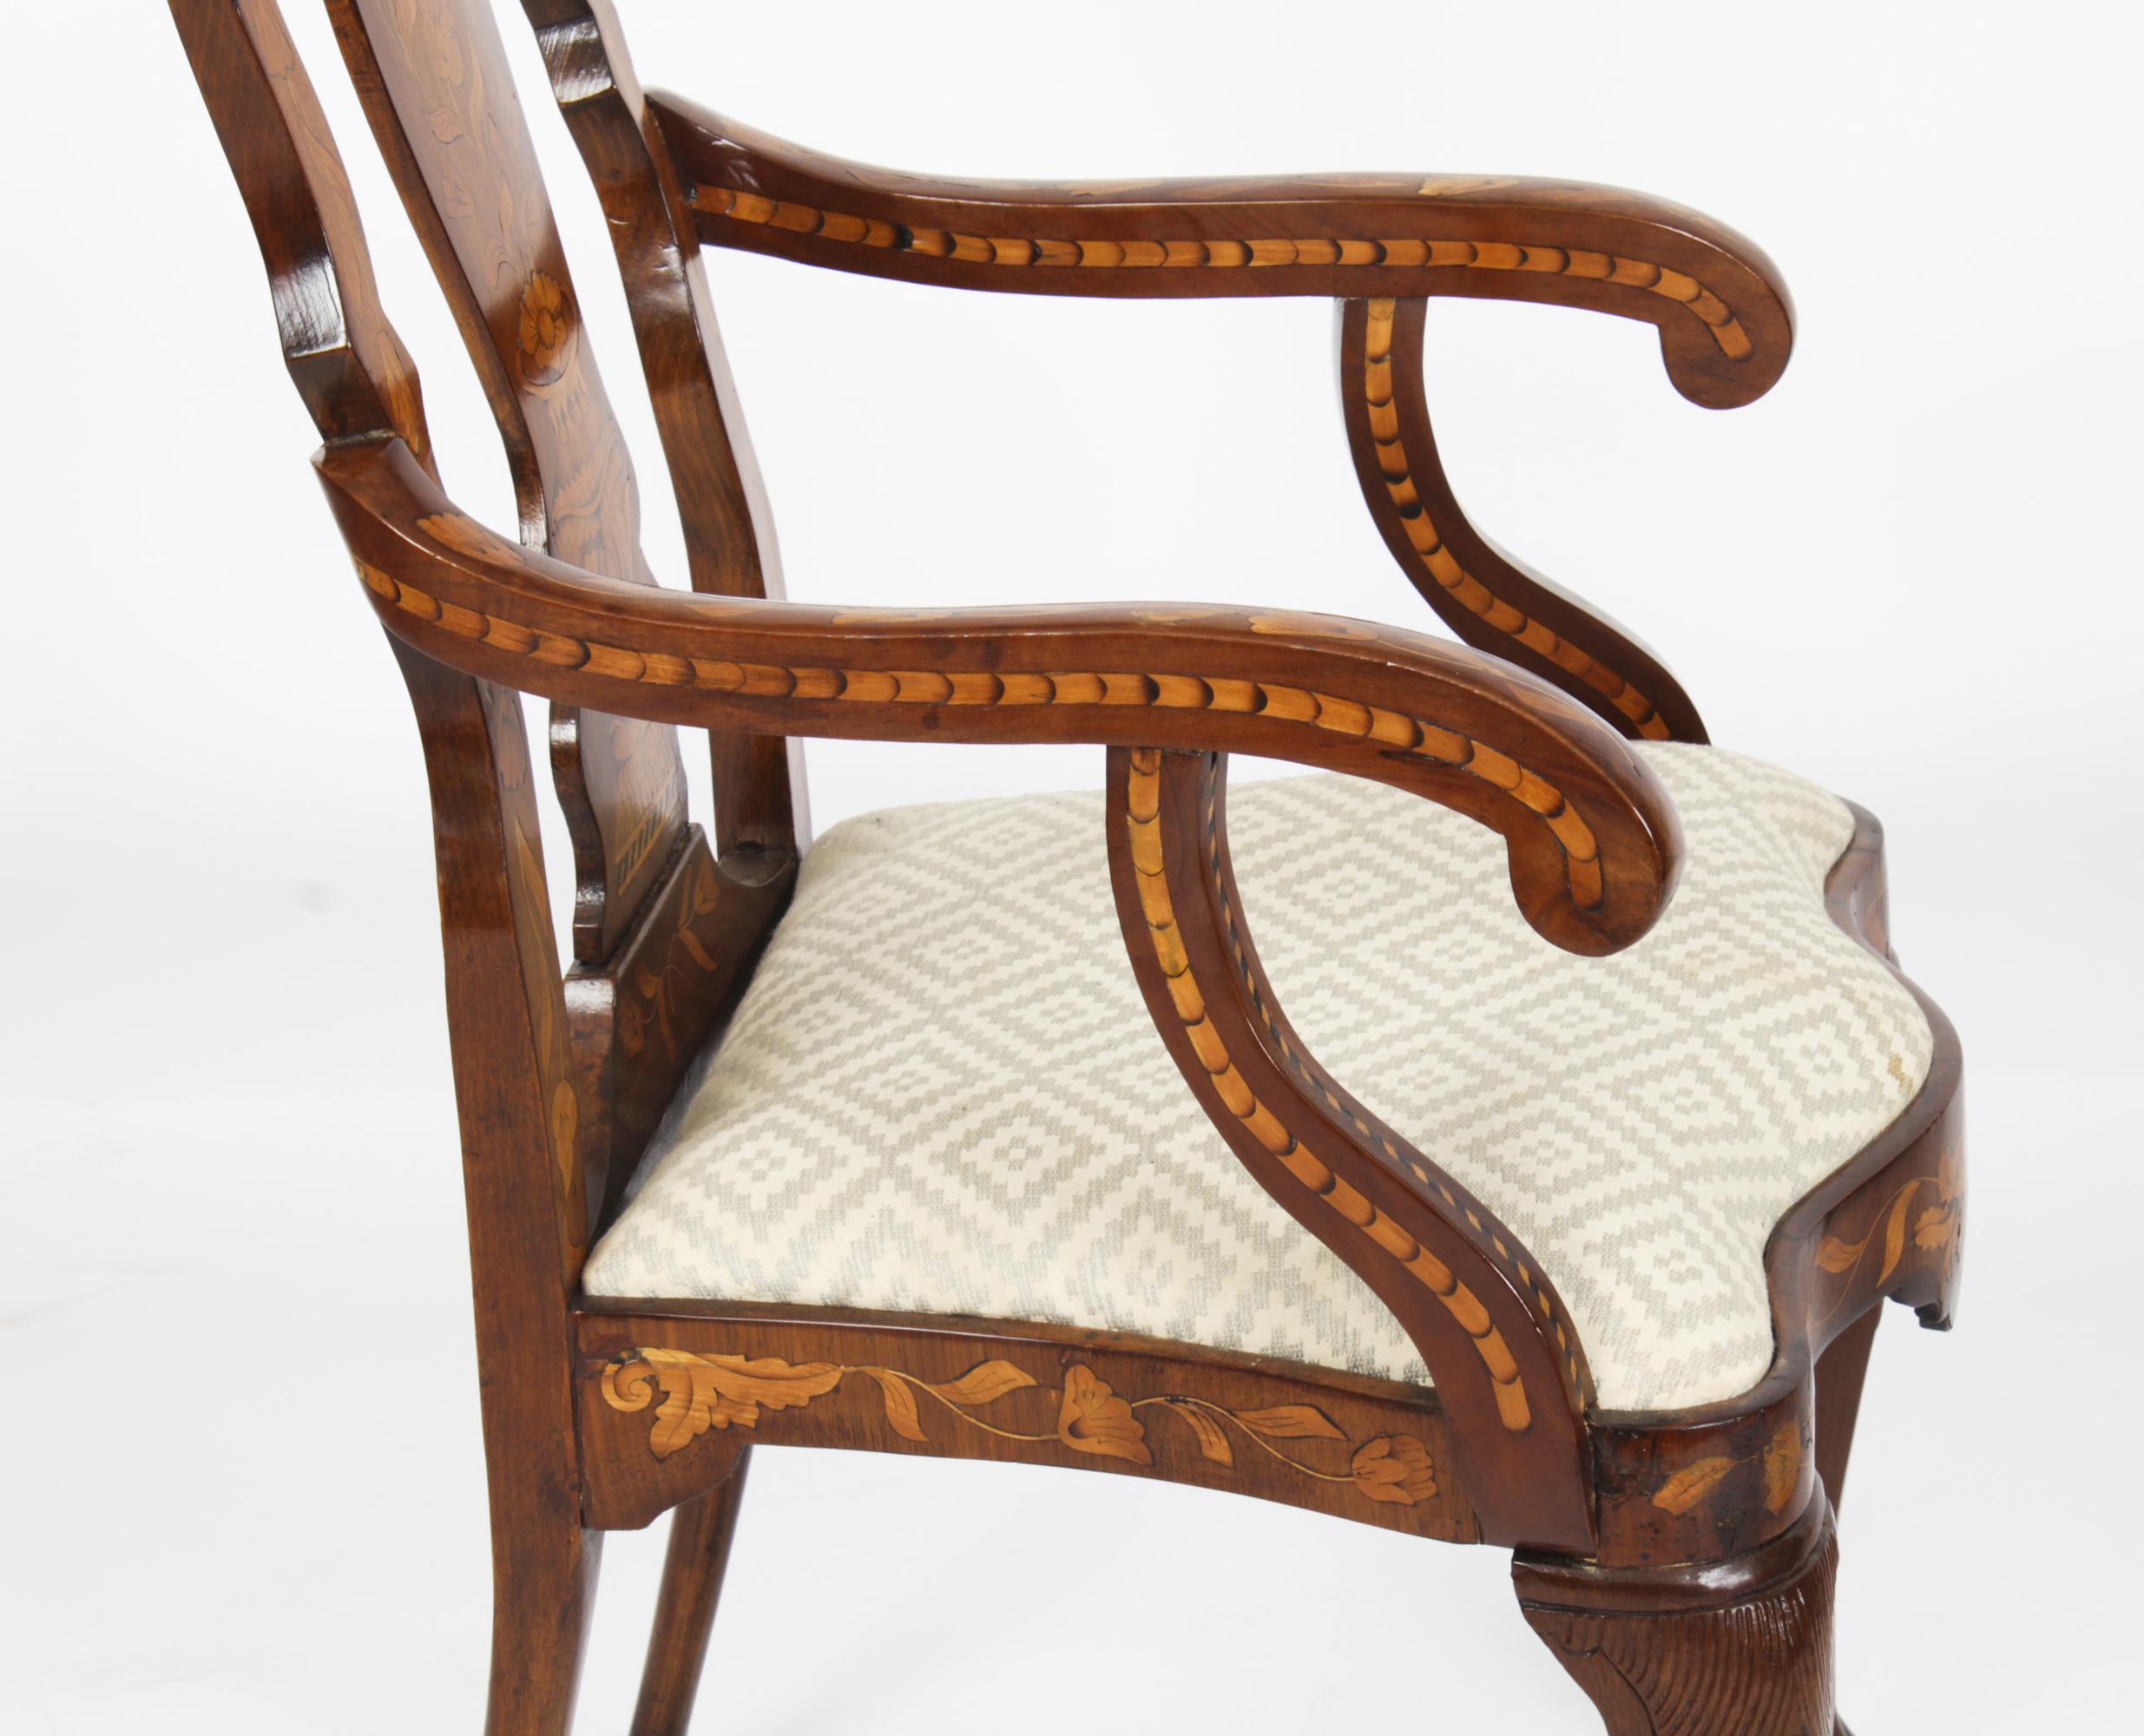 This is a wonderful and rare antique harlequin set of twelve high backed Dutch walnut and floral marquetry dining chairs, Circa 1780 in date.
 
The set comprised ten side chairs and two armchairs that have been skillfully crafted from walnut and